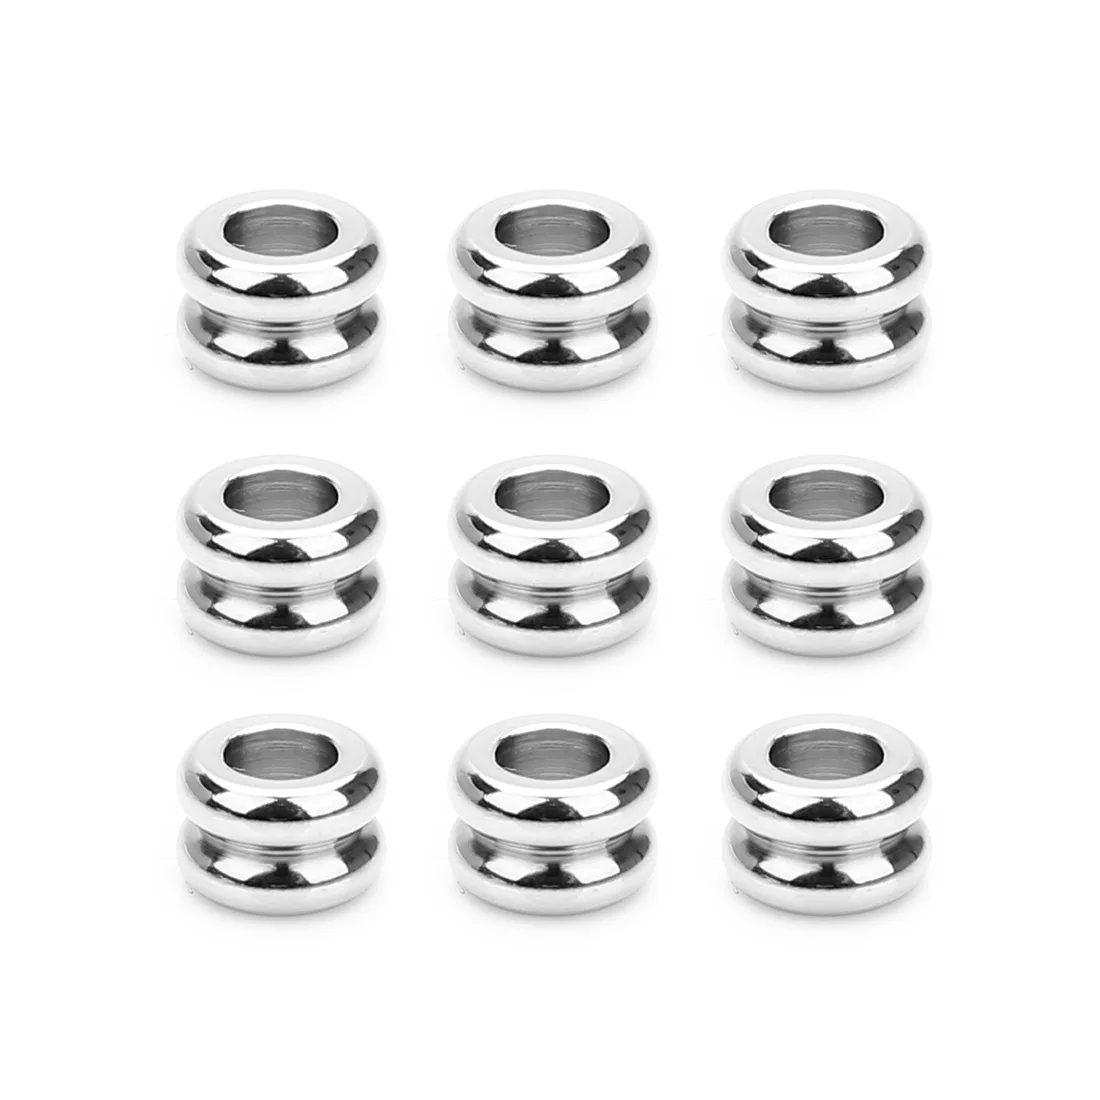 

Charm Diy Bracelets Jewelry Making Components Stainless Steel Spacer Beads End Beads Stopper Positioning, Silver